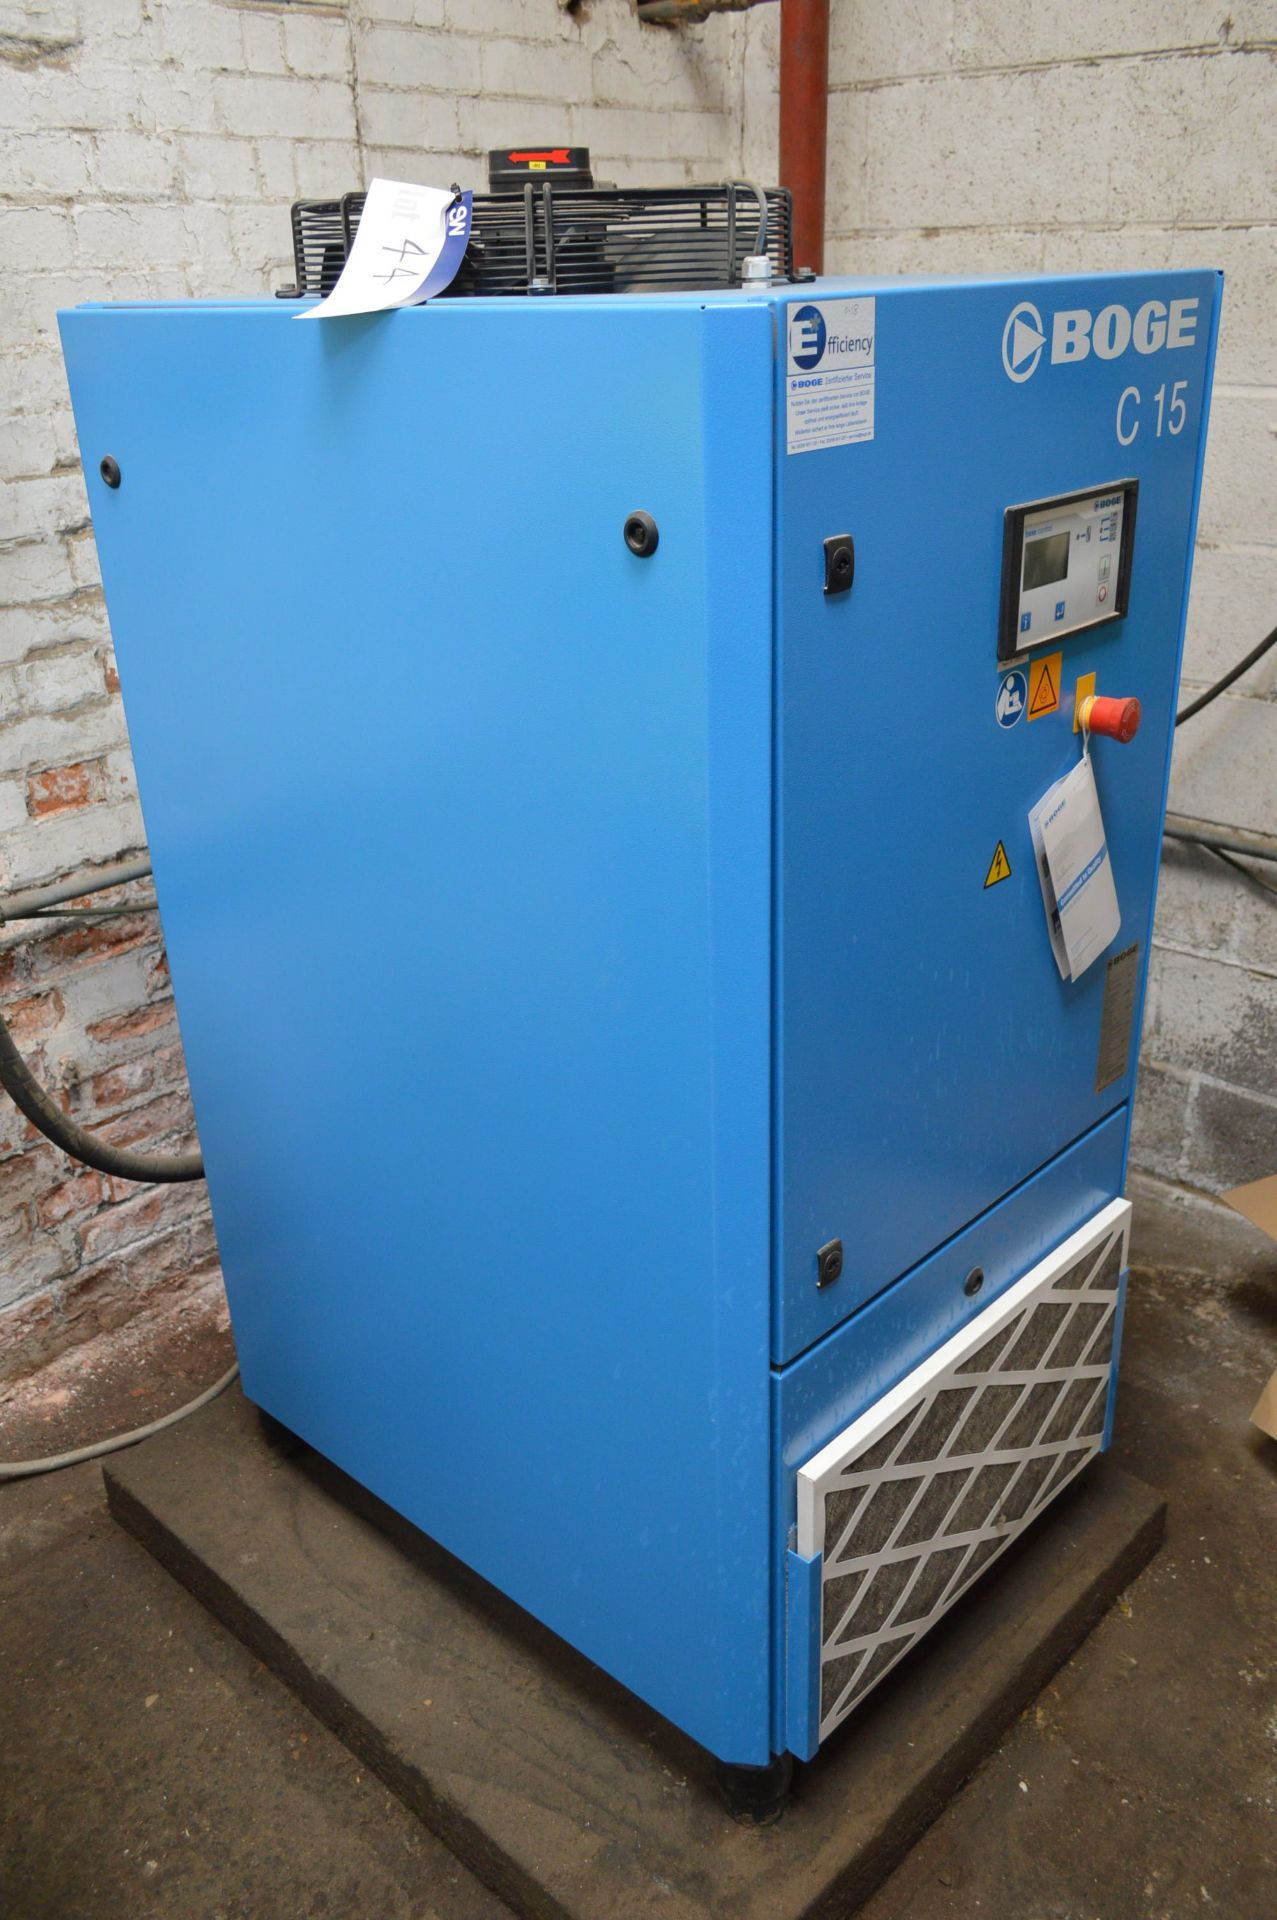 Boge C15 PACKAGED AIR COMPRESSOR, serial no. 5108452, year of manufacture 2017, 4499 hours (at